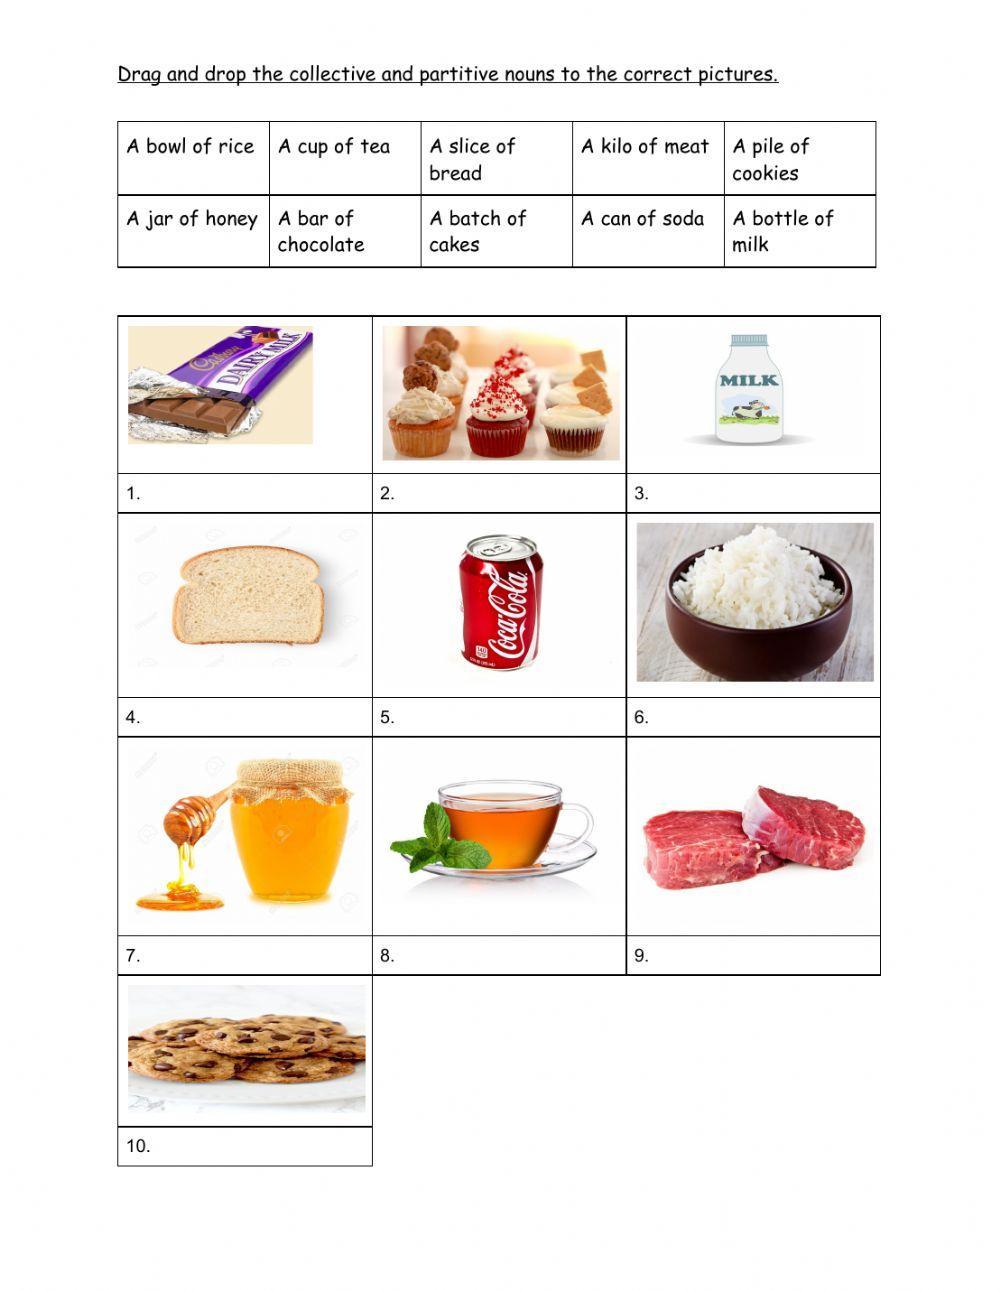 Collective & partitive nouns for food and drinks